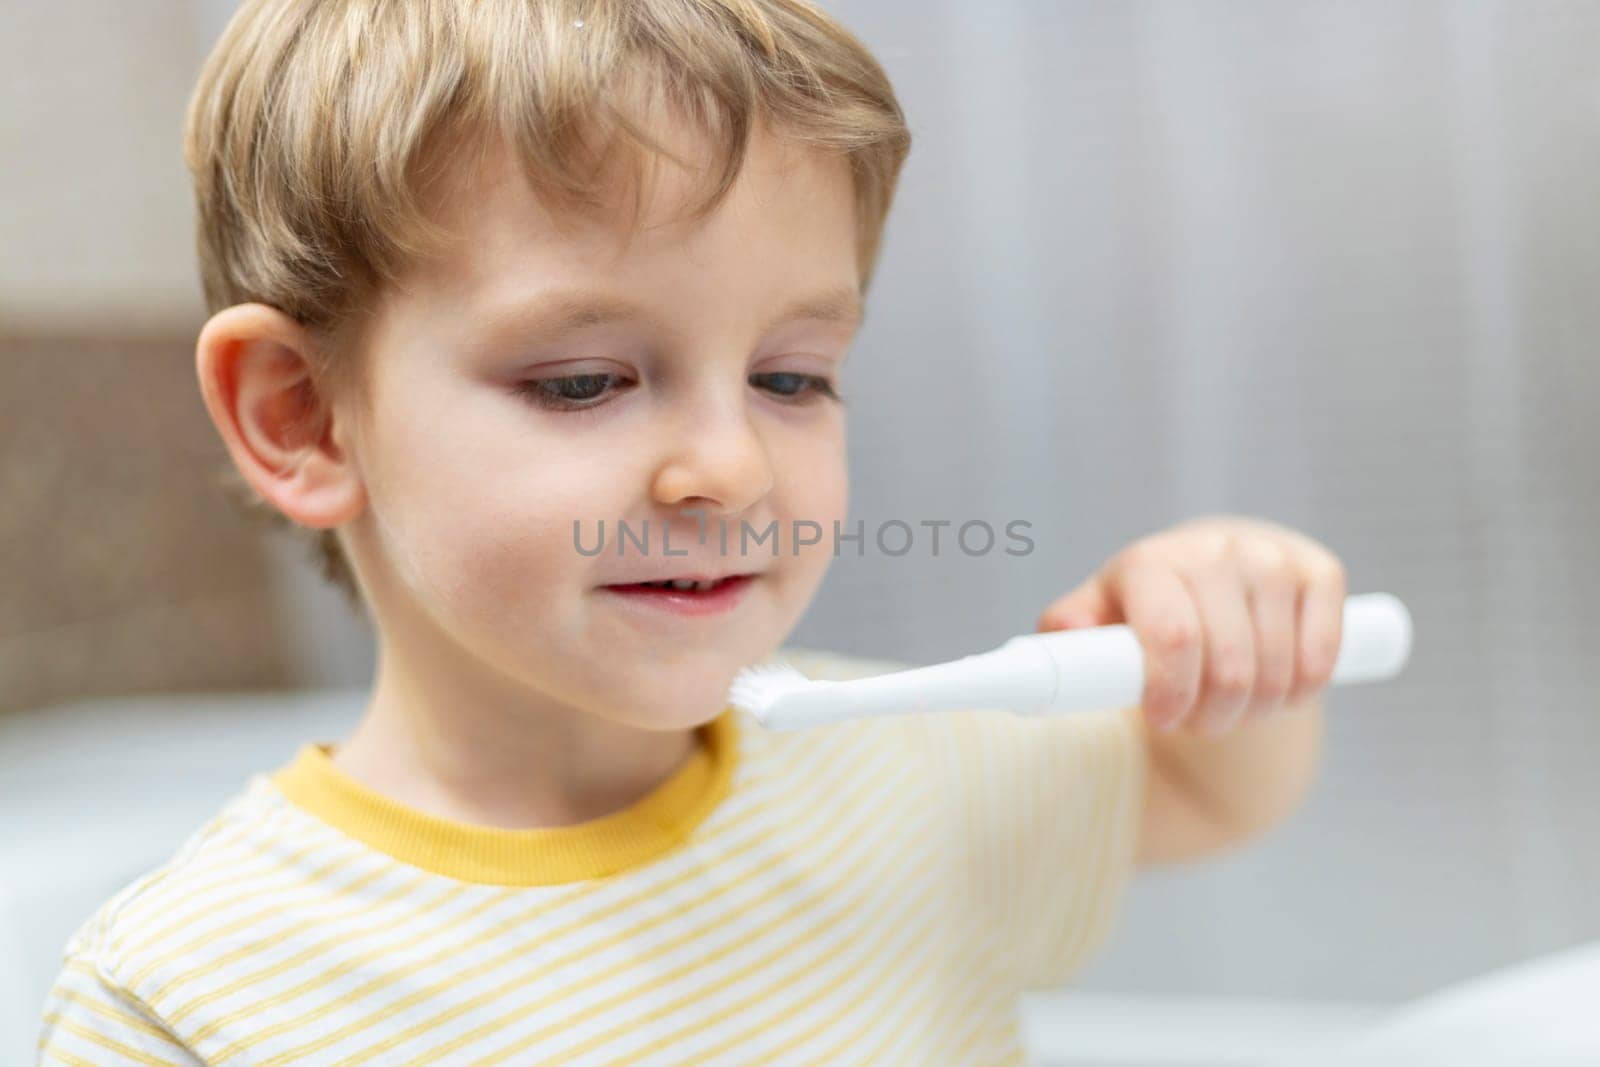 Young boy brushing teeth with electric toothbrush in bathroom. Candid domestic scene.